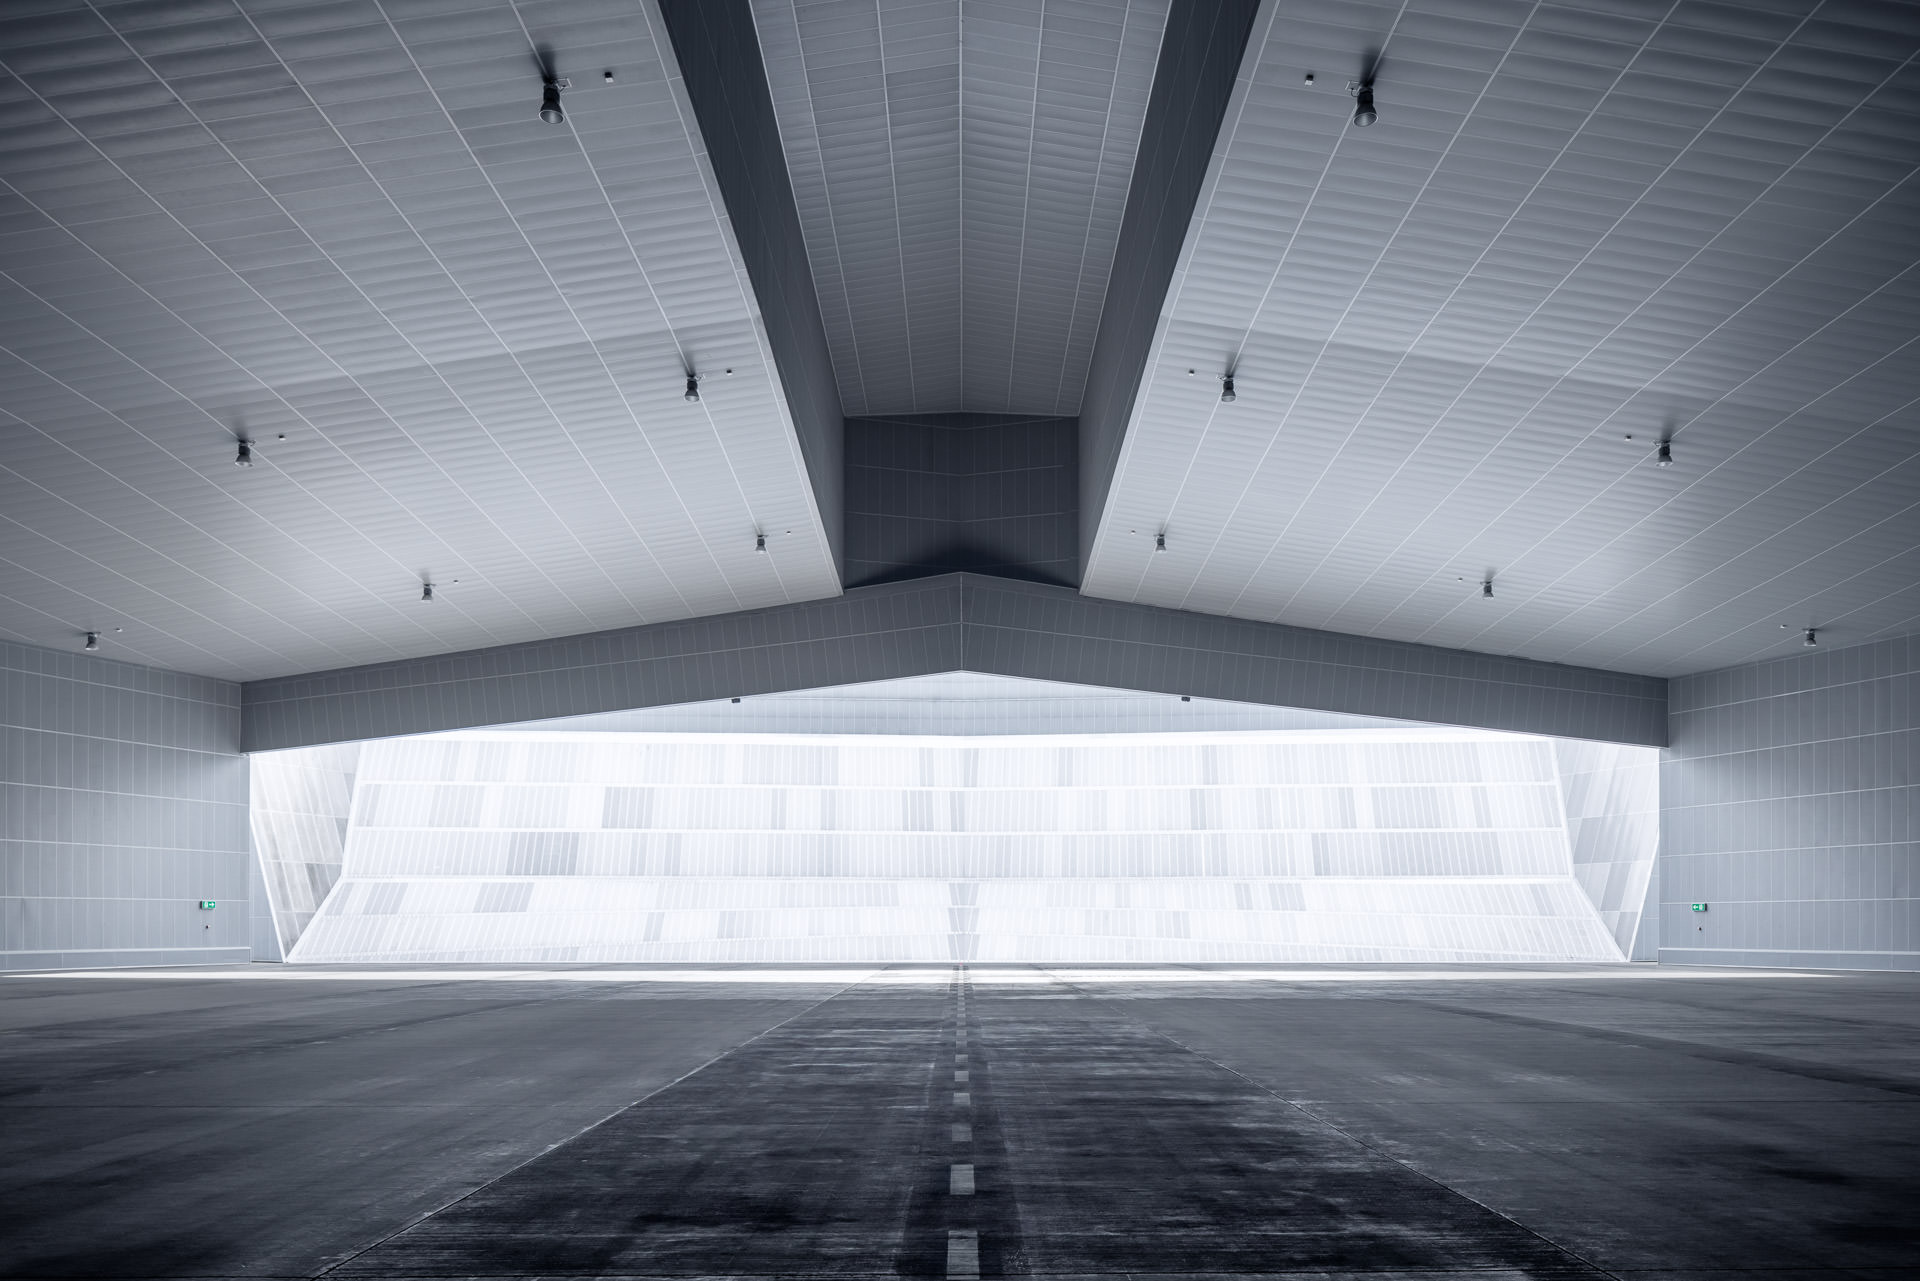 The Silencer - Inside sound silencing hangar at Zurich Airport ZRH - Art Photography: Philippe Wiget